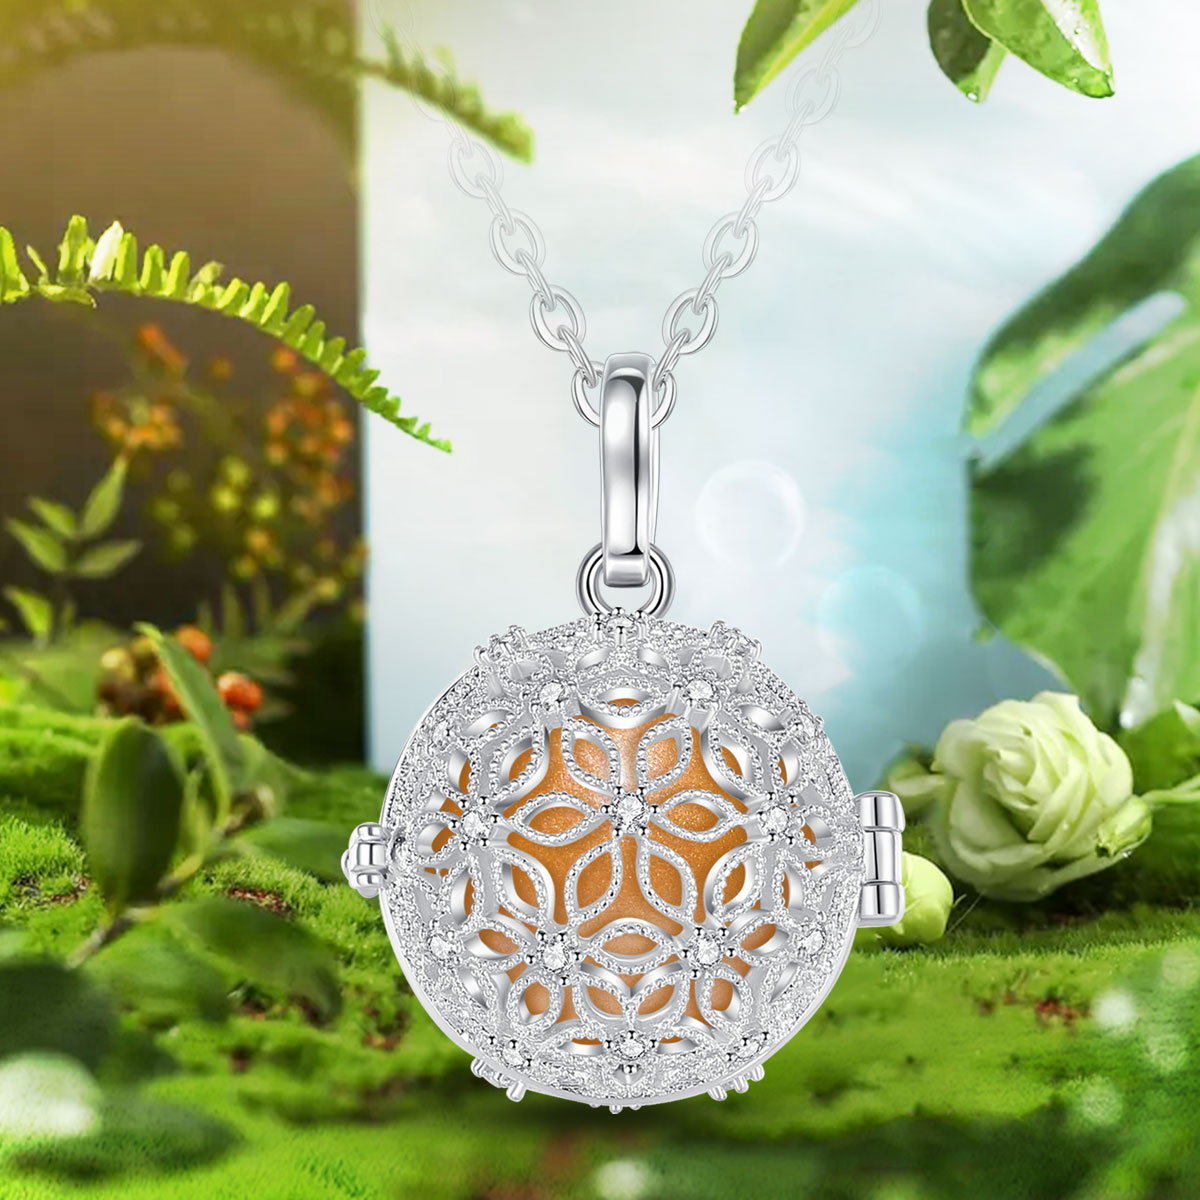 Merryshine Jewelry 925 Silver Pregnancy Bell Harmony Ball Necklace Pendant